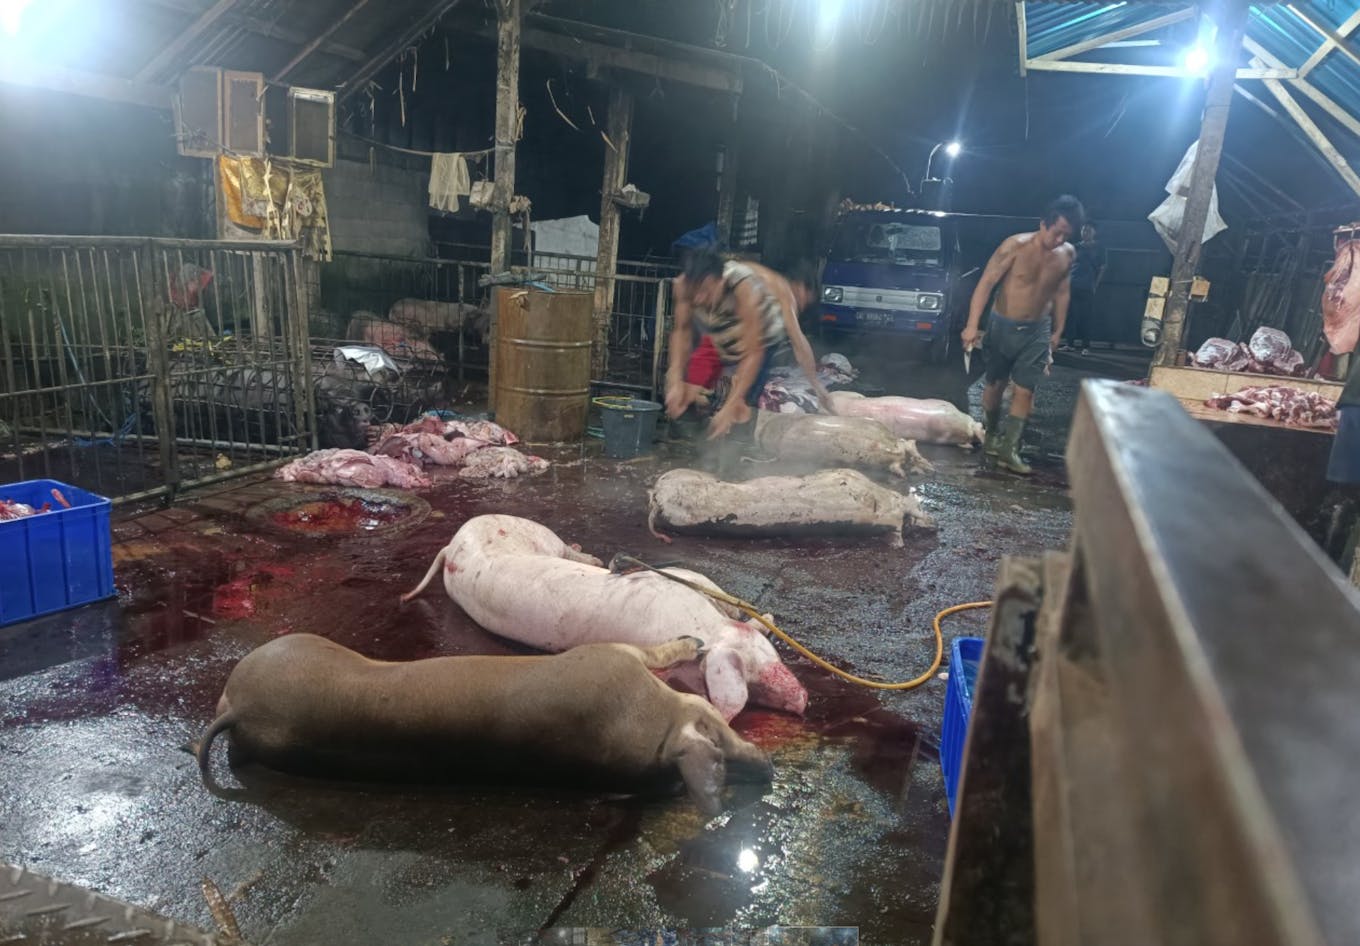 Investment into abattoirs in Asia has largely been neglected, because it is considered unappealing to funders.